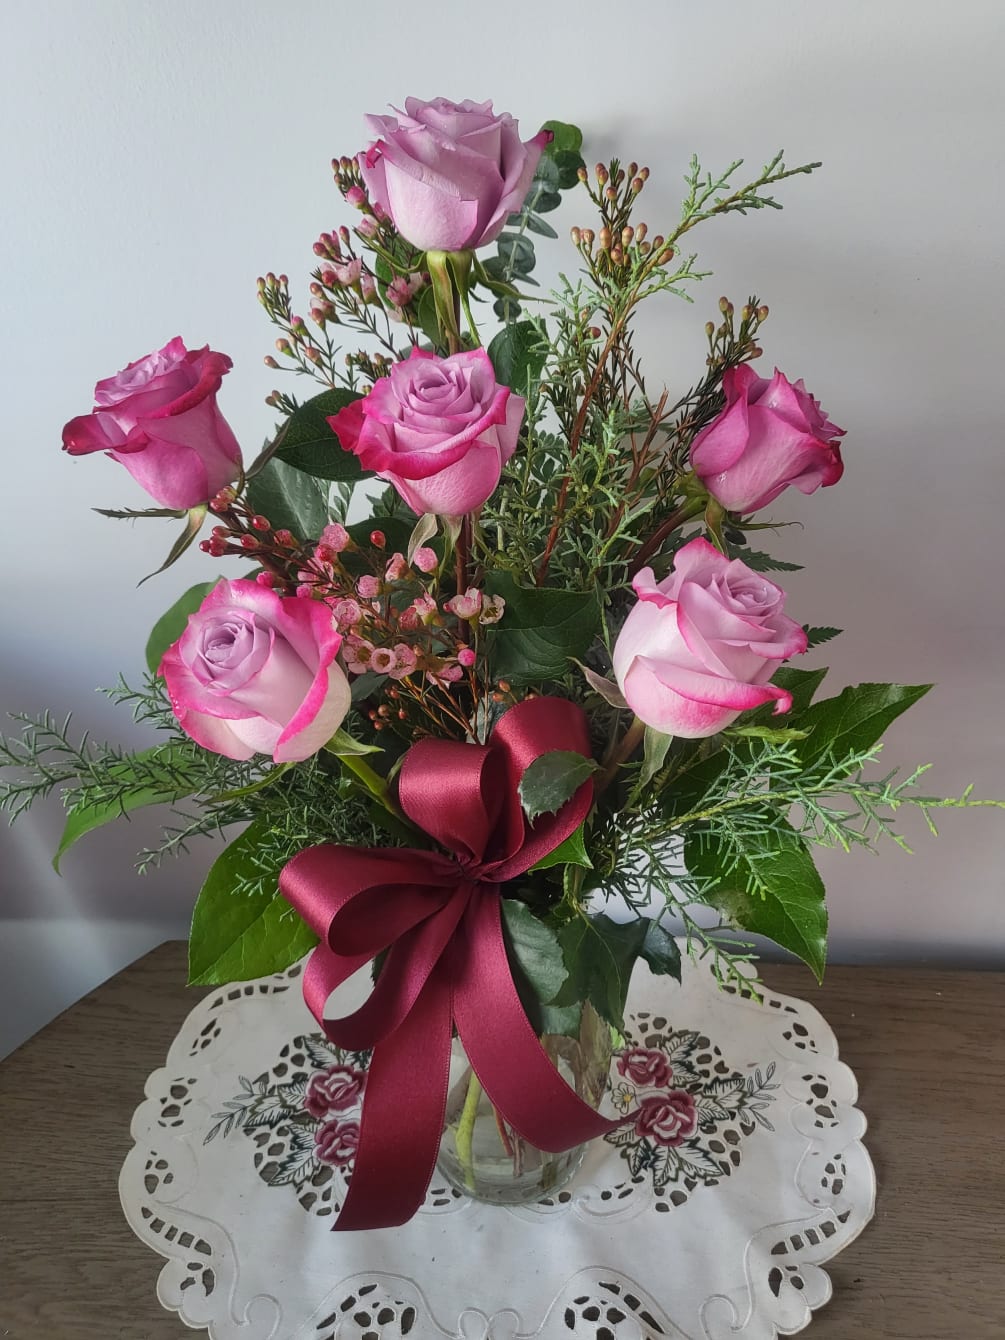 Designed with 6 toses a bow and waxflower